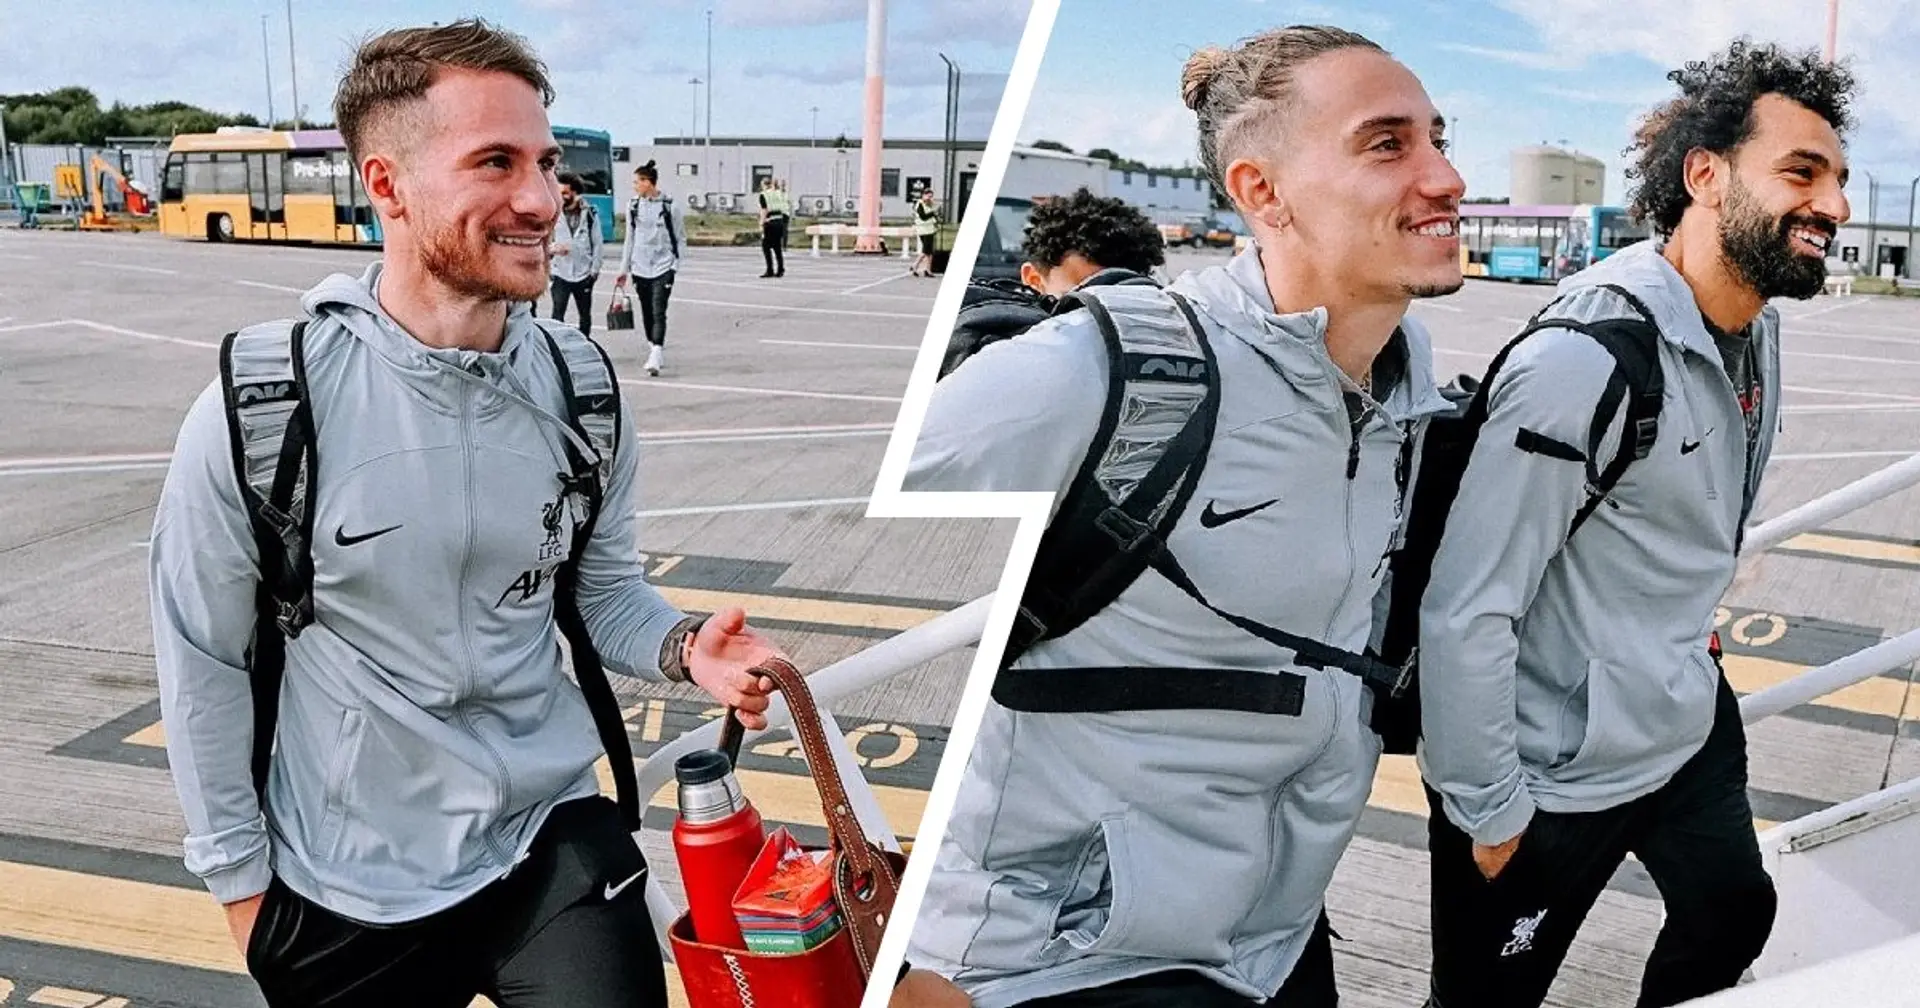 14 best images as Liverpool depart for Austria to face LASK in Europa League opener